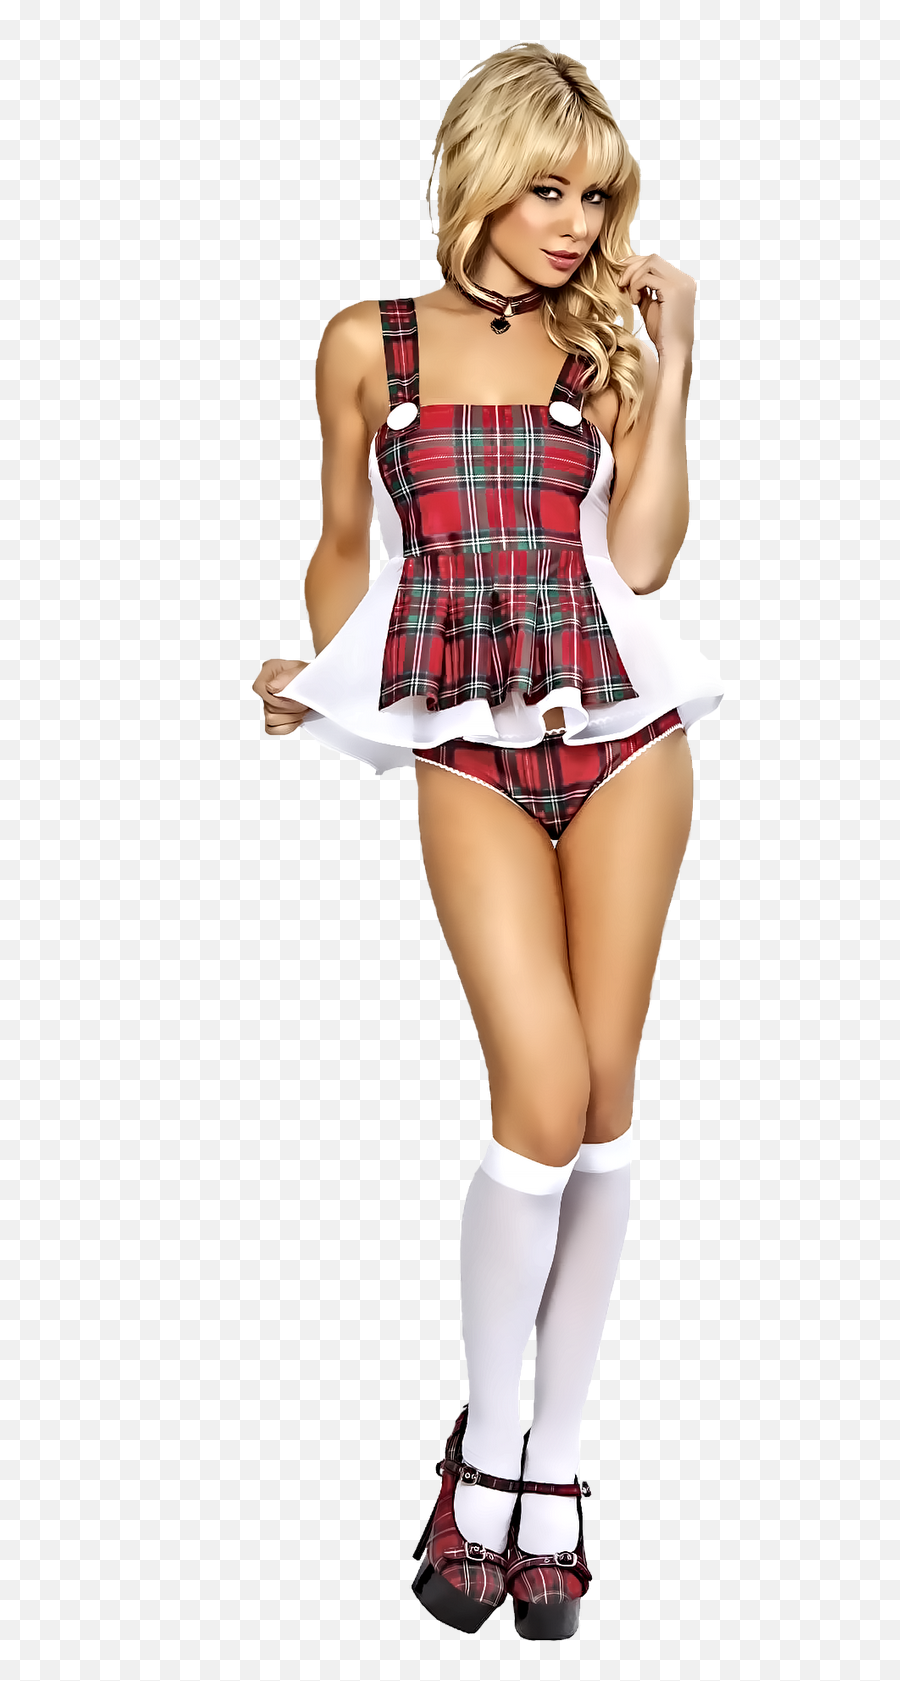 Girls Png Images Free Download Girl - Girls Wearing Sexy Costumes,Hot Woman Png